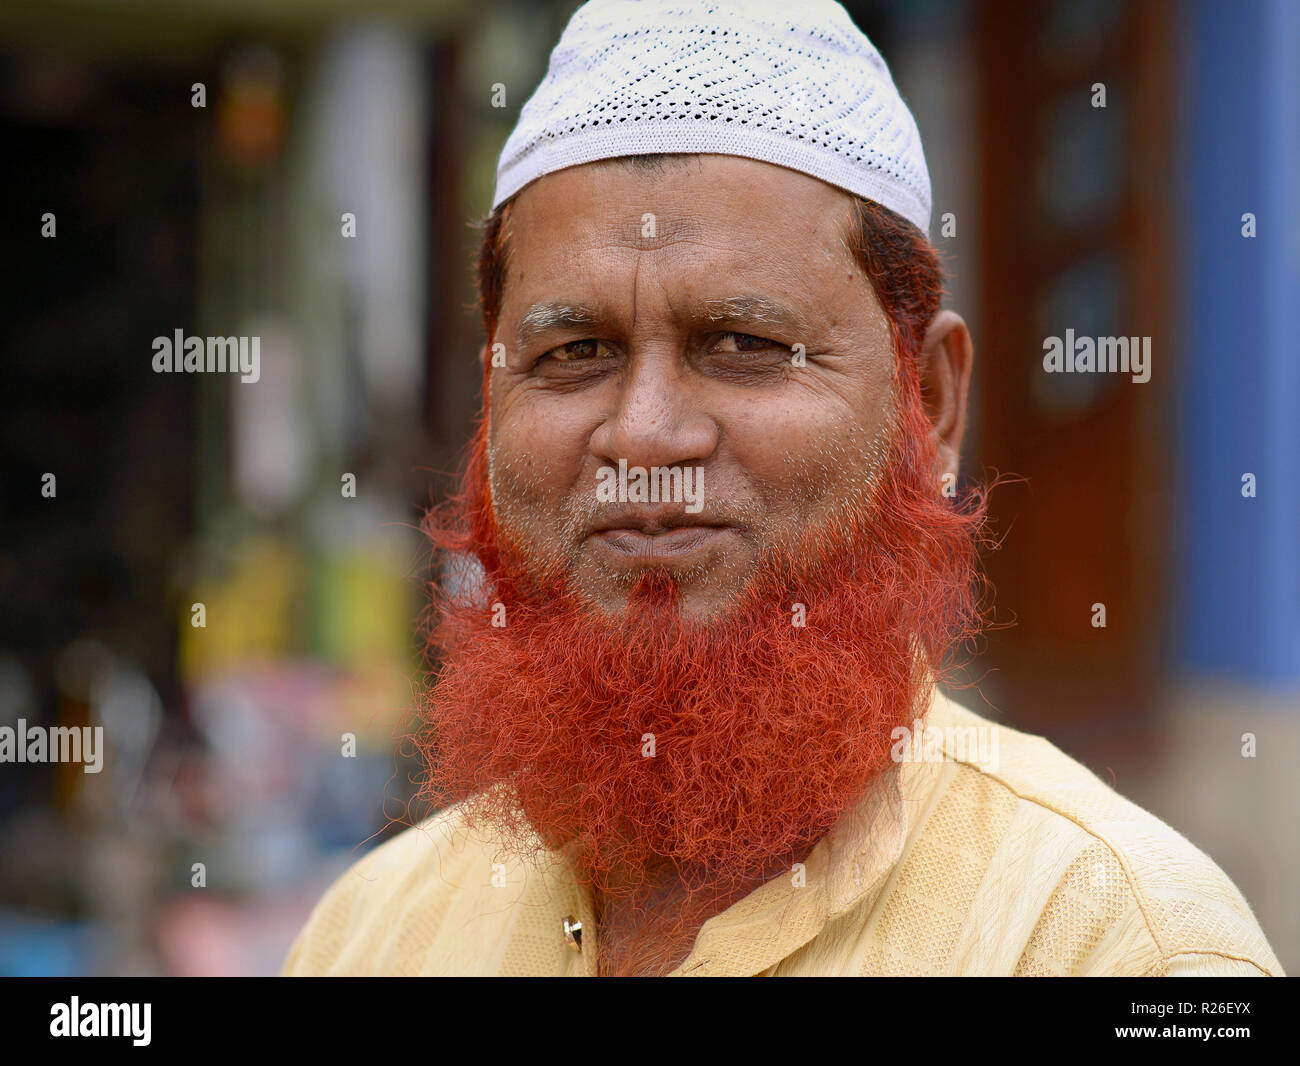 Elderly Indian Muslim man with henna-dyed Islamic beard wears a white prayer cap (taqiyah) and smiles for the camera. Stock Photo